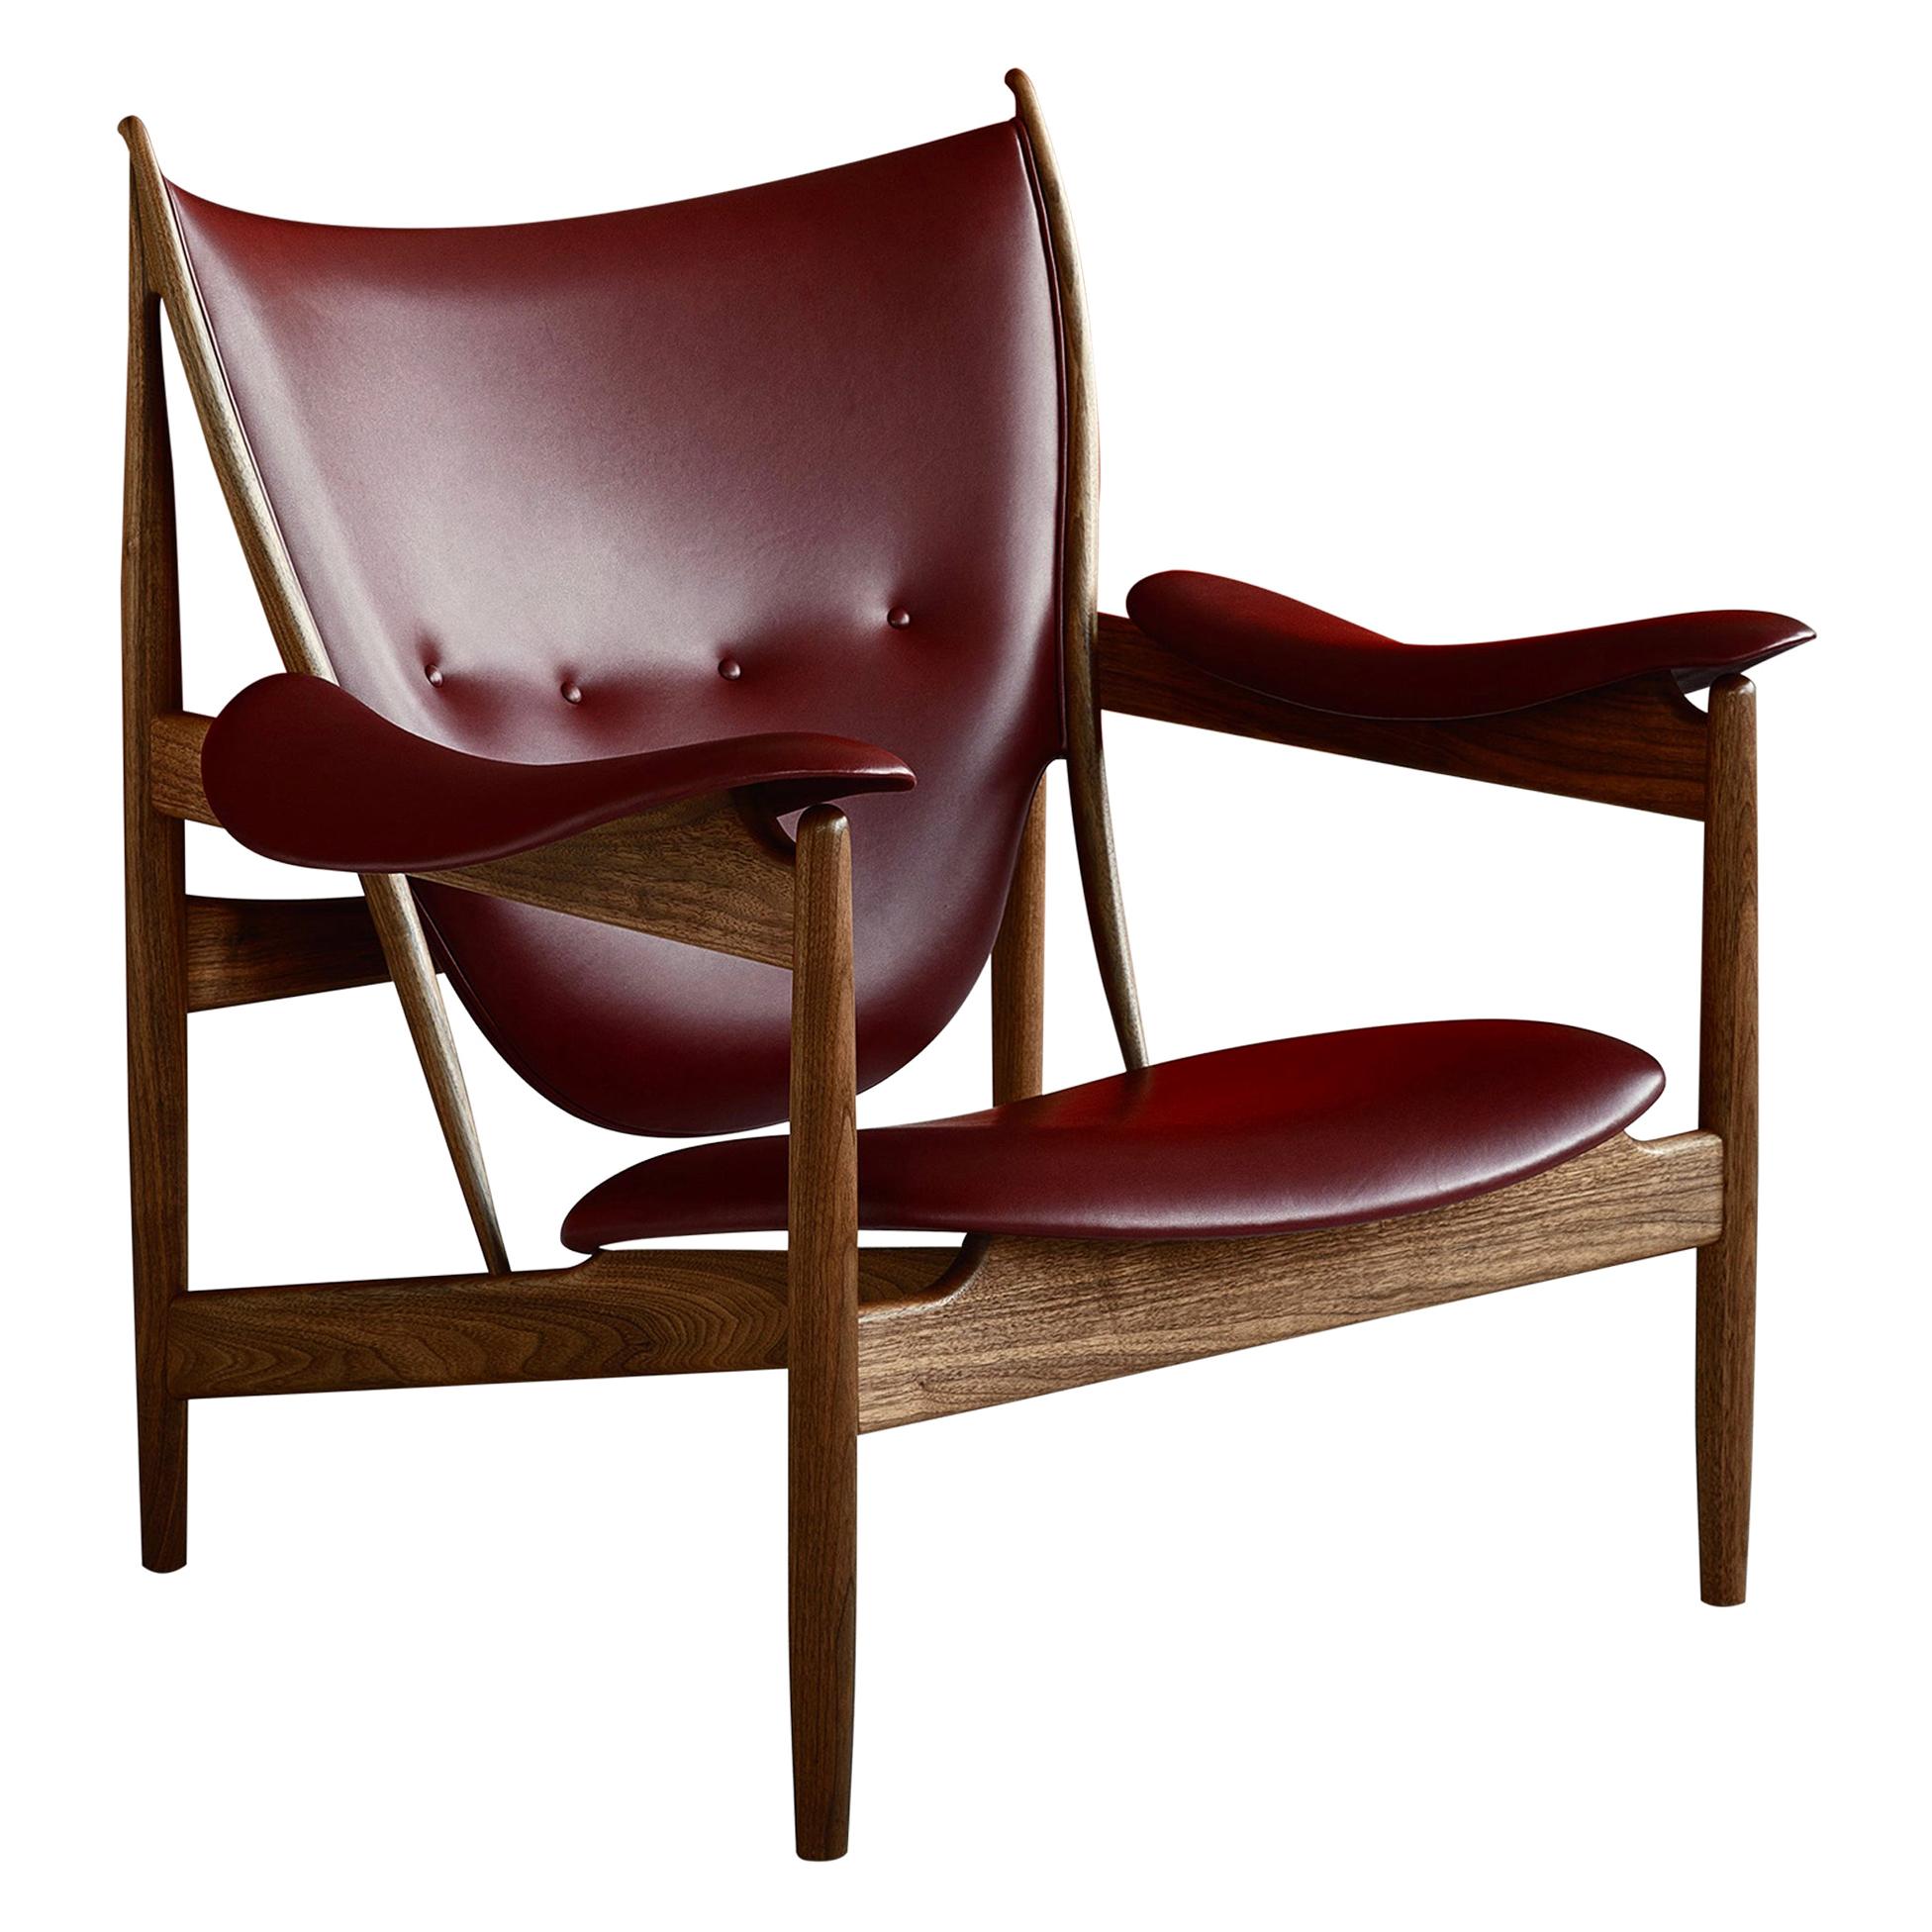 Modern Set of Chieftain Armchair and Chieftain Stool in Wood and Leather by Finn Juhl